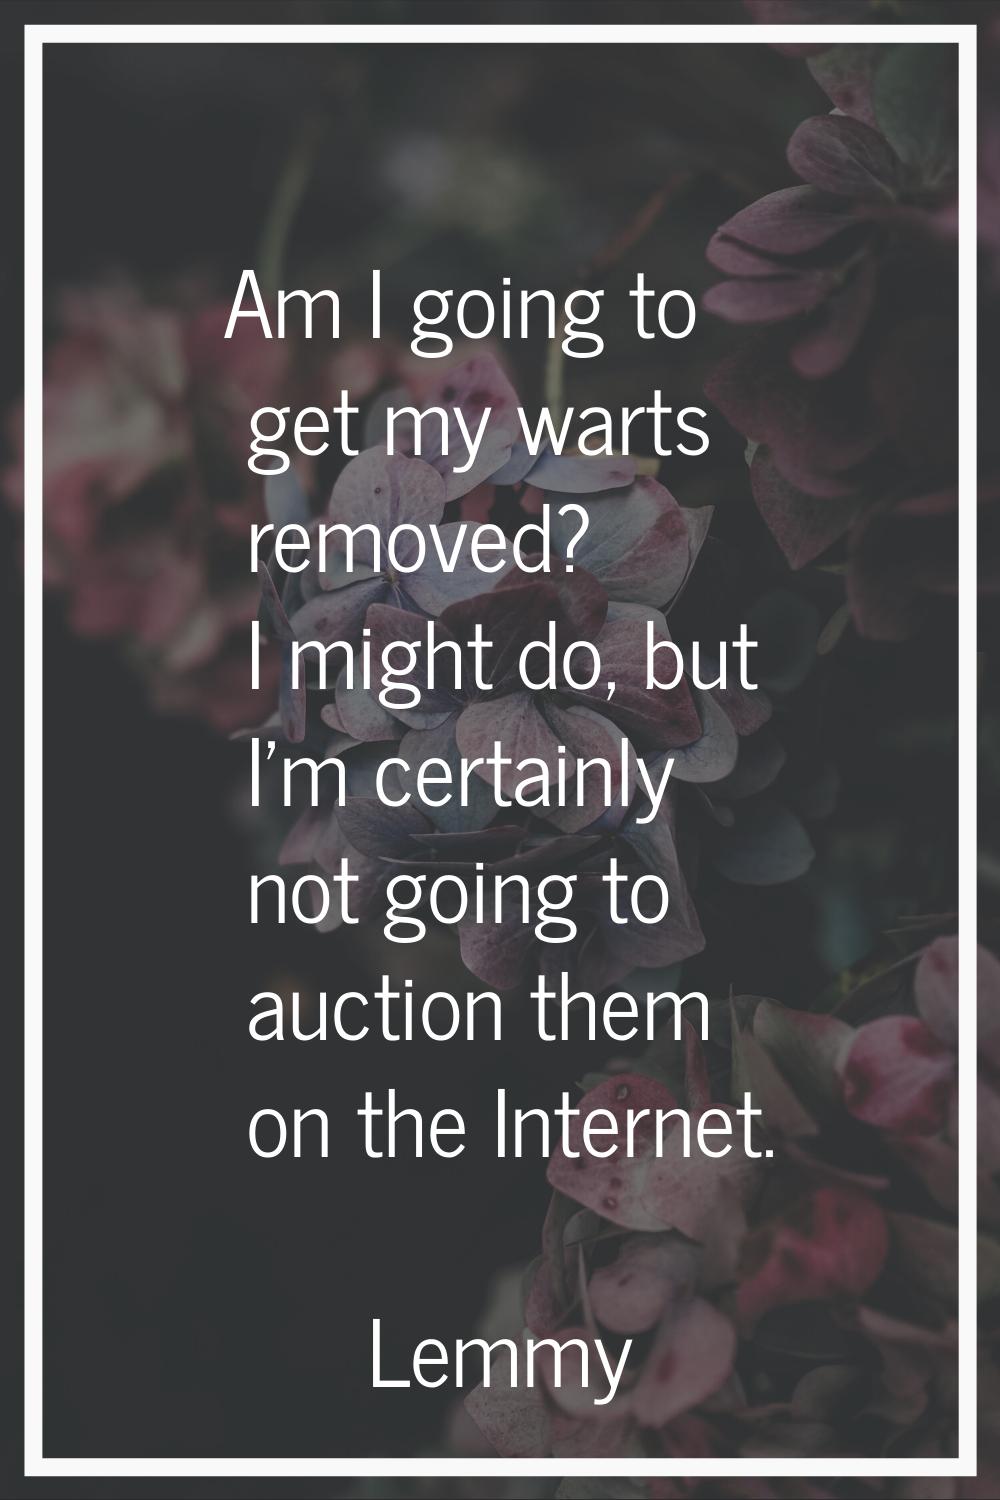 Am I going to get my warts removed? I might do, but I'm certainly not going to auction them on the 